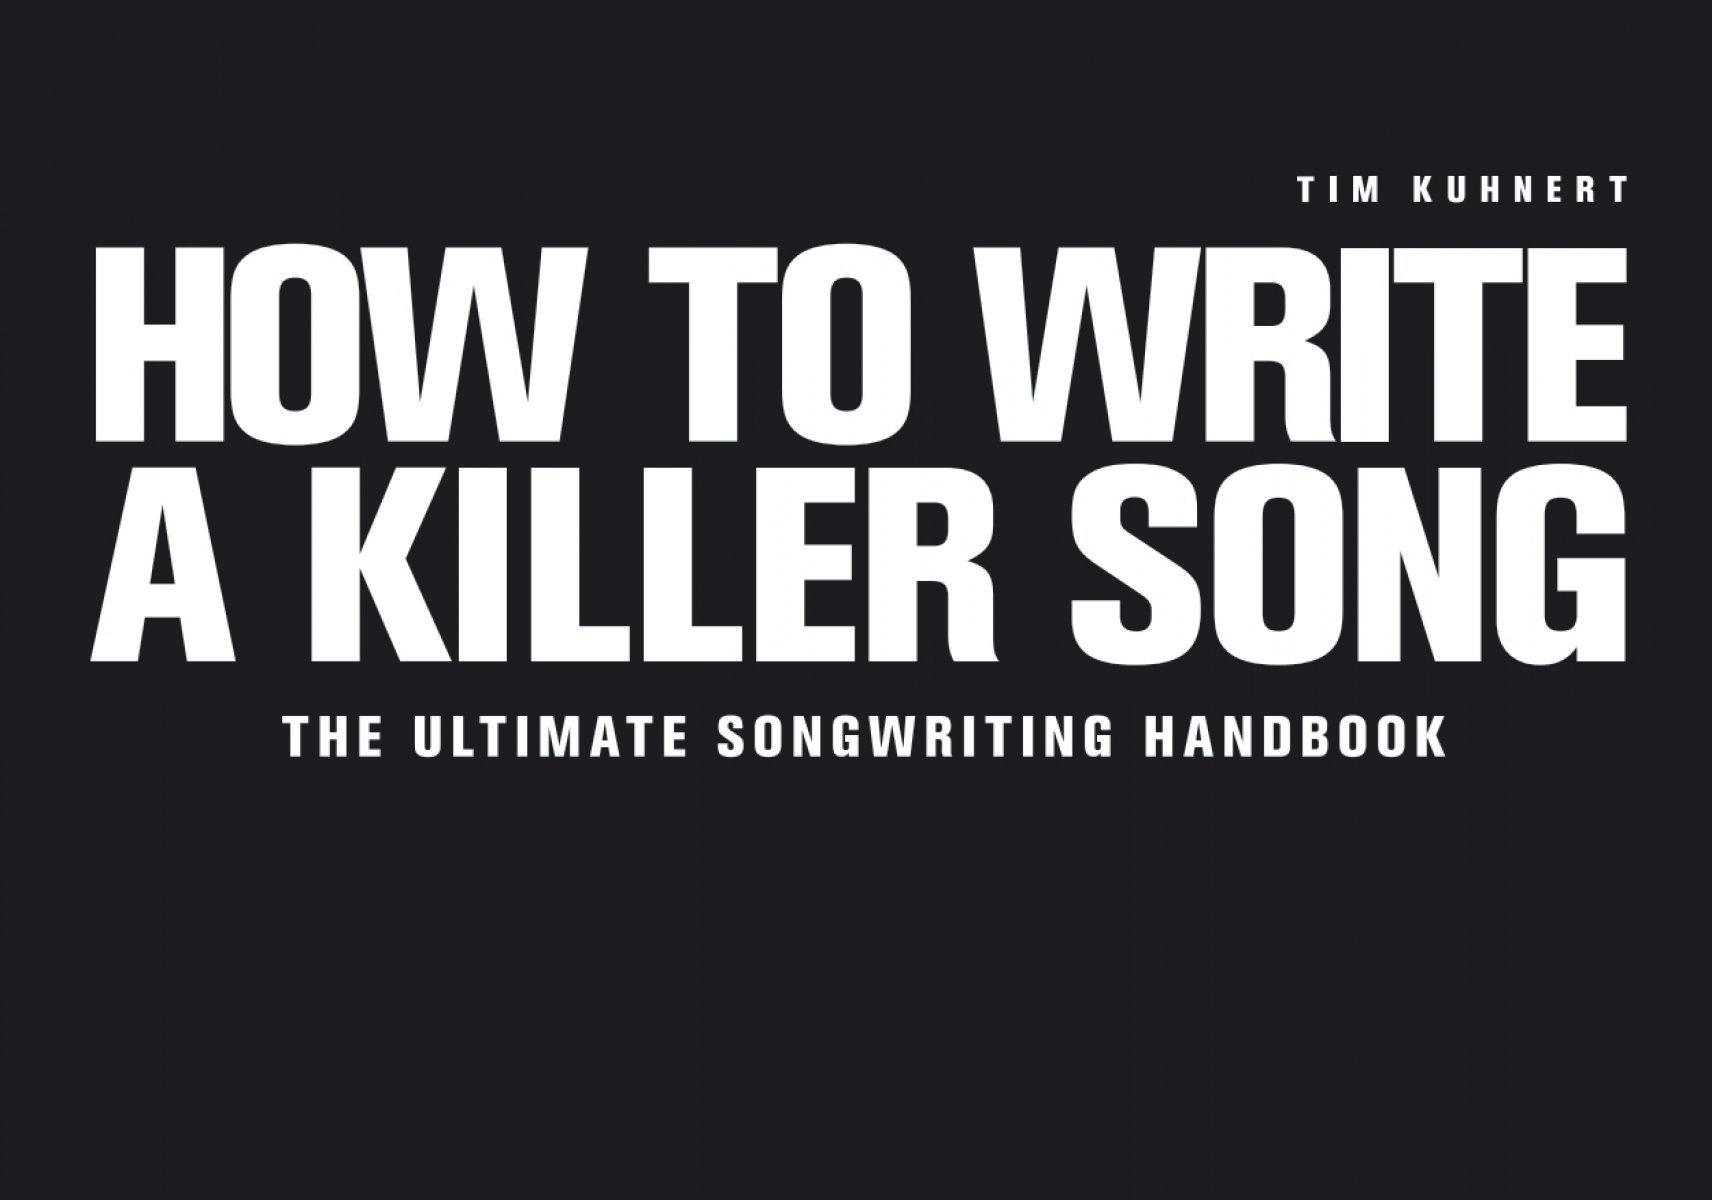 HOW TO WRITE A KILLER SONG - THE ULTIMATE SONGWRITING HANDBOOK